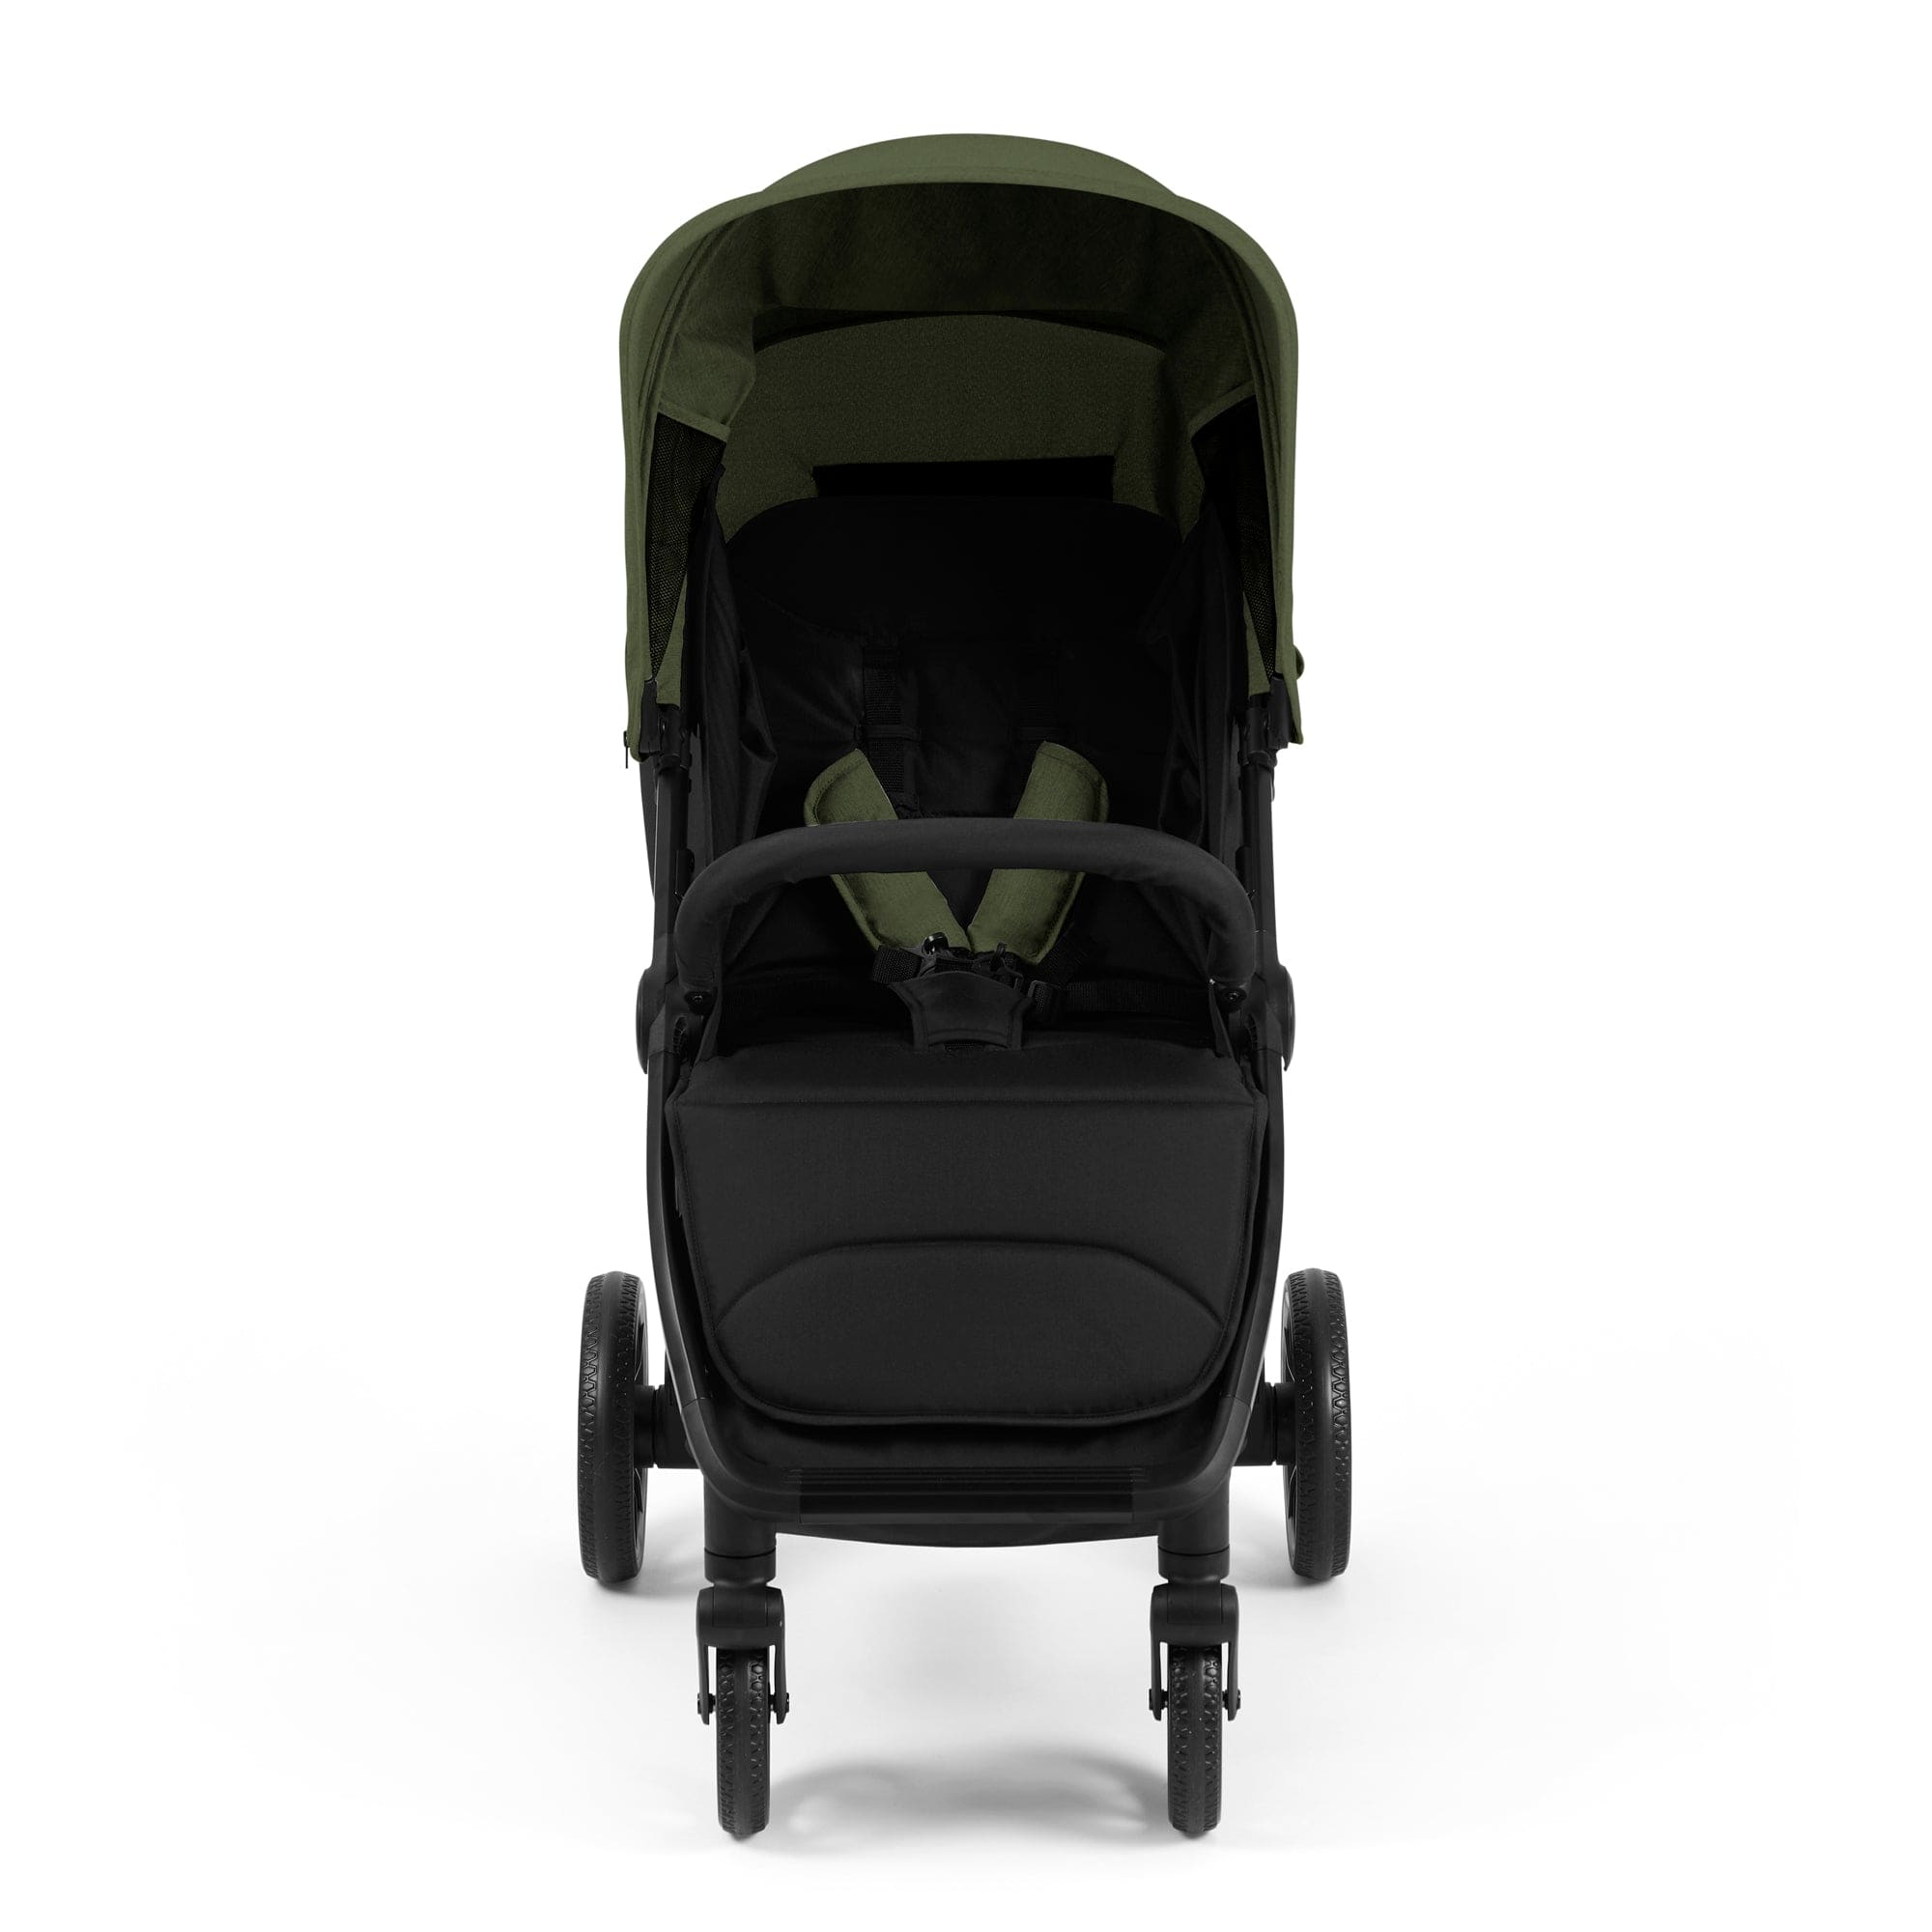 STOMP STRIDE PRIME STROLLER in Woodland Pushchairs & Buggies 15-006-300-066 5056515033953